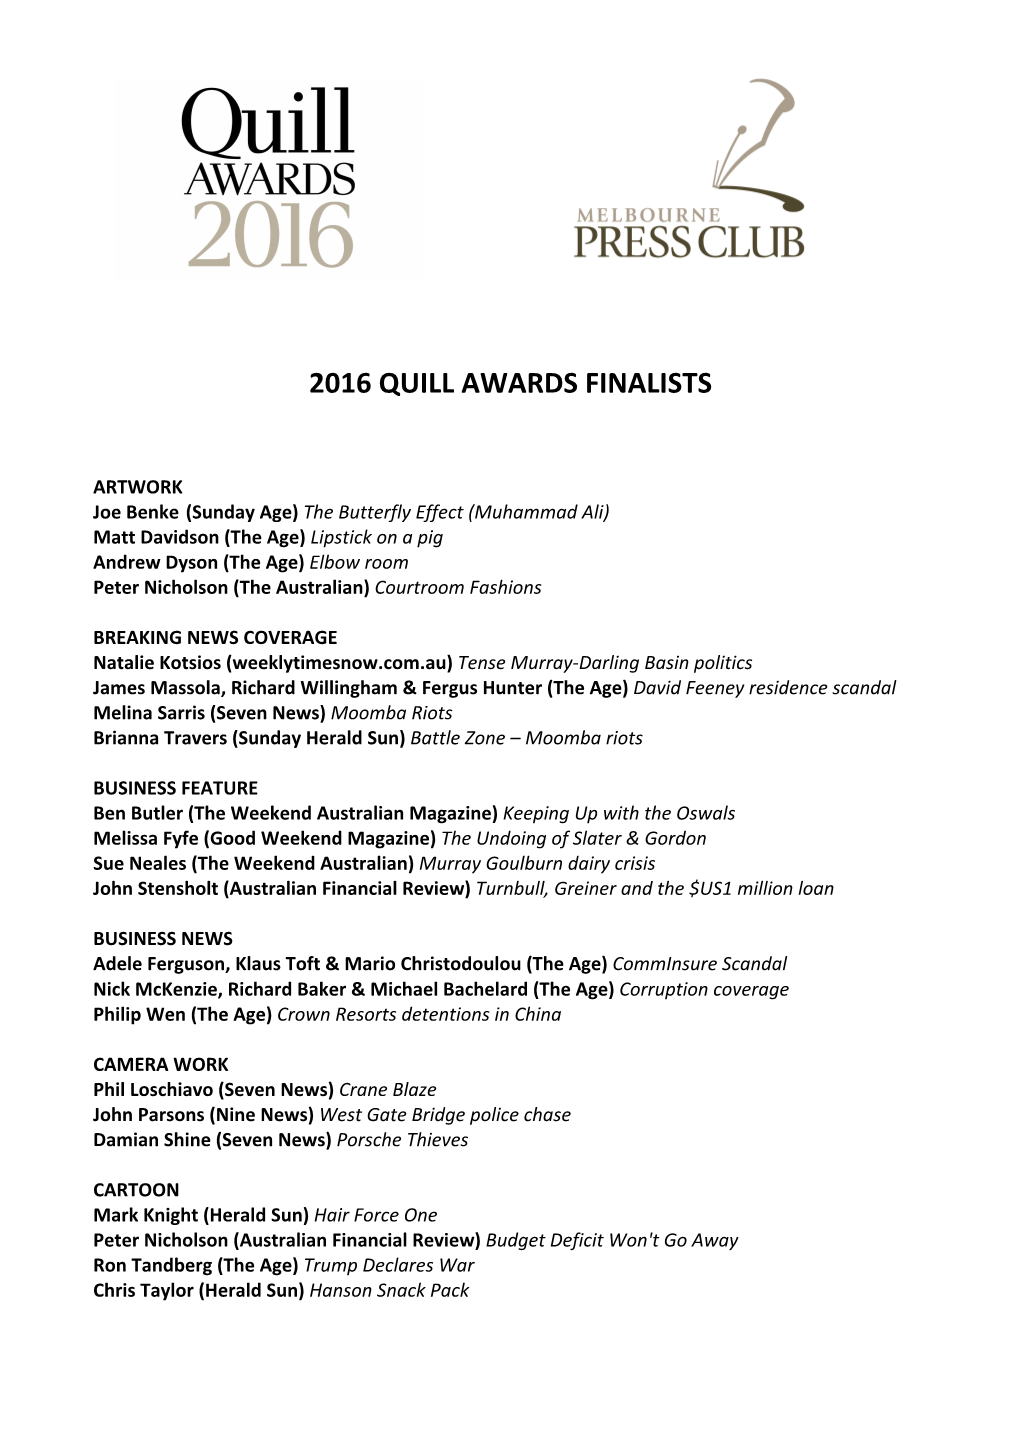 2016 Quill Awards Finalists